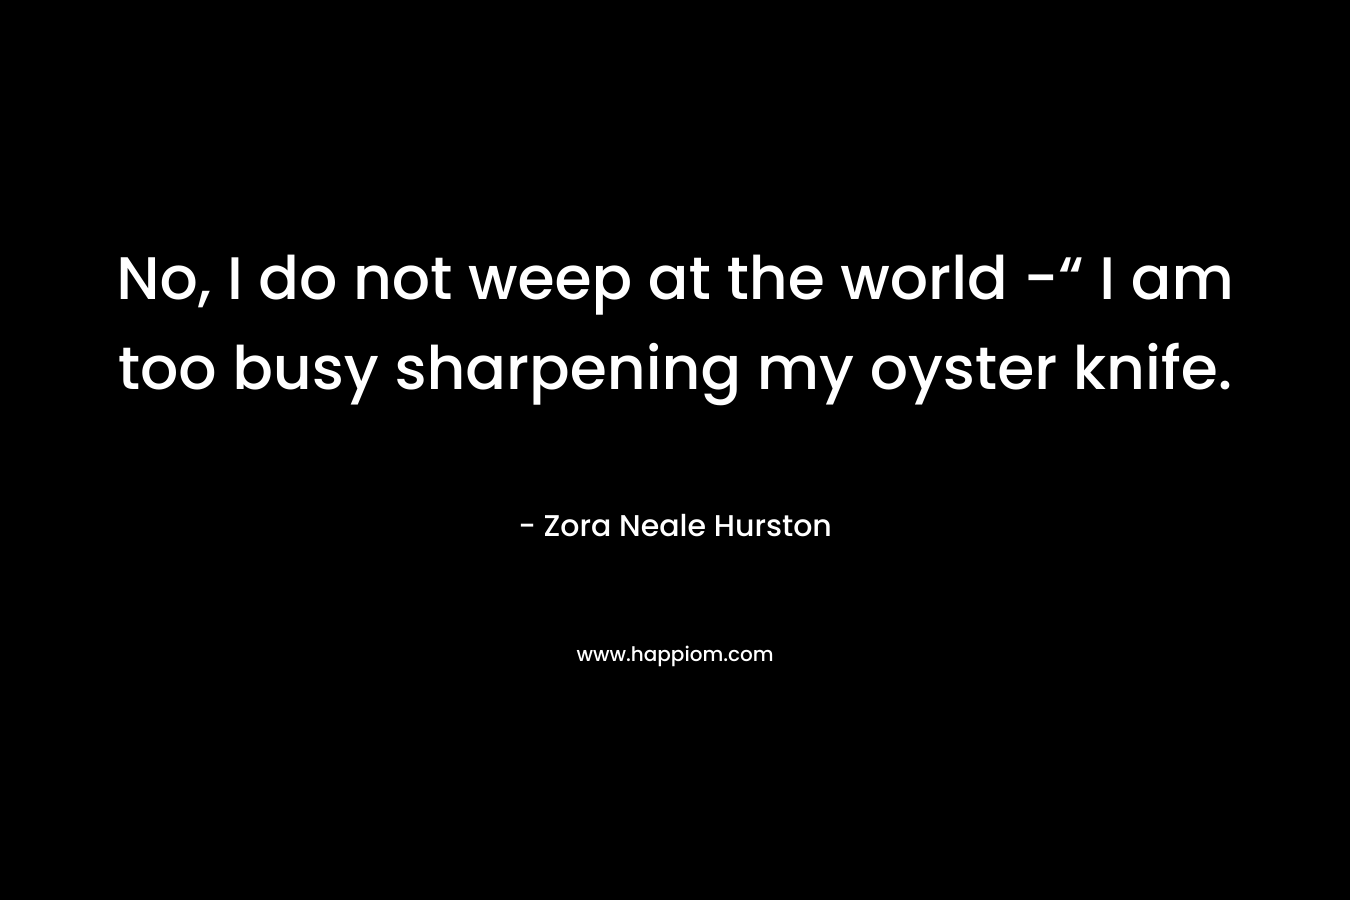 No, I do not weep at the world -“ I am too busy sharpening my oyster knife.